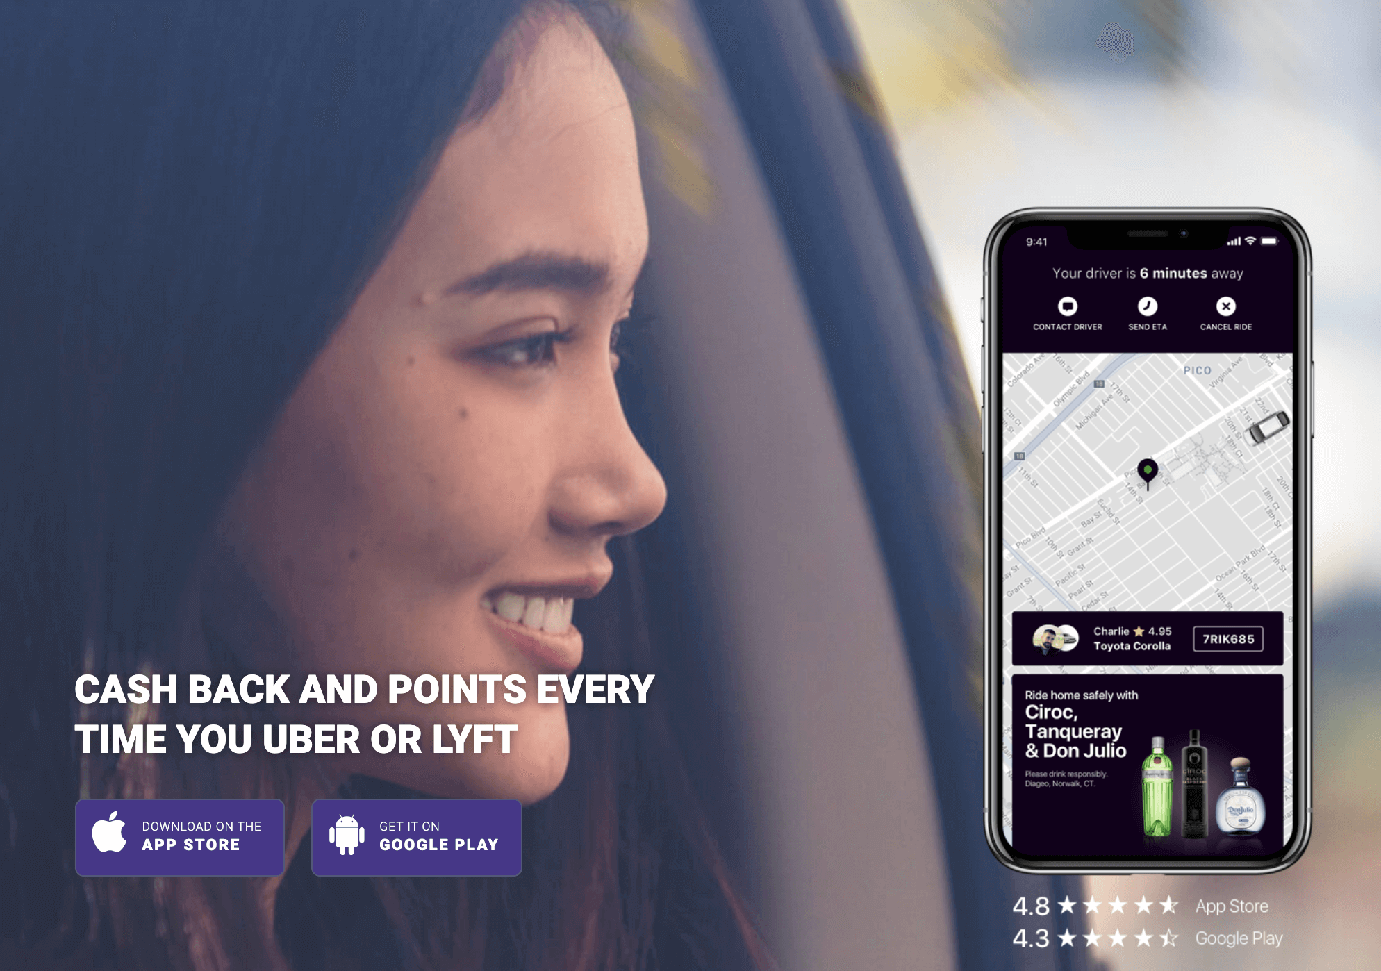 Freebird enables you to collect rewards points and earn cash back offers for every ride you take with Uber and Lyft. To get started with Freebird